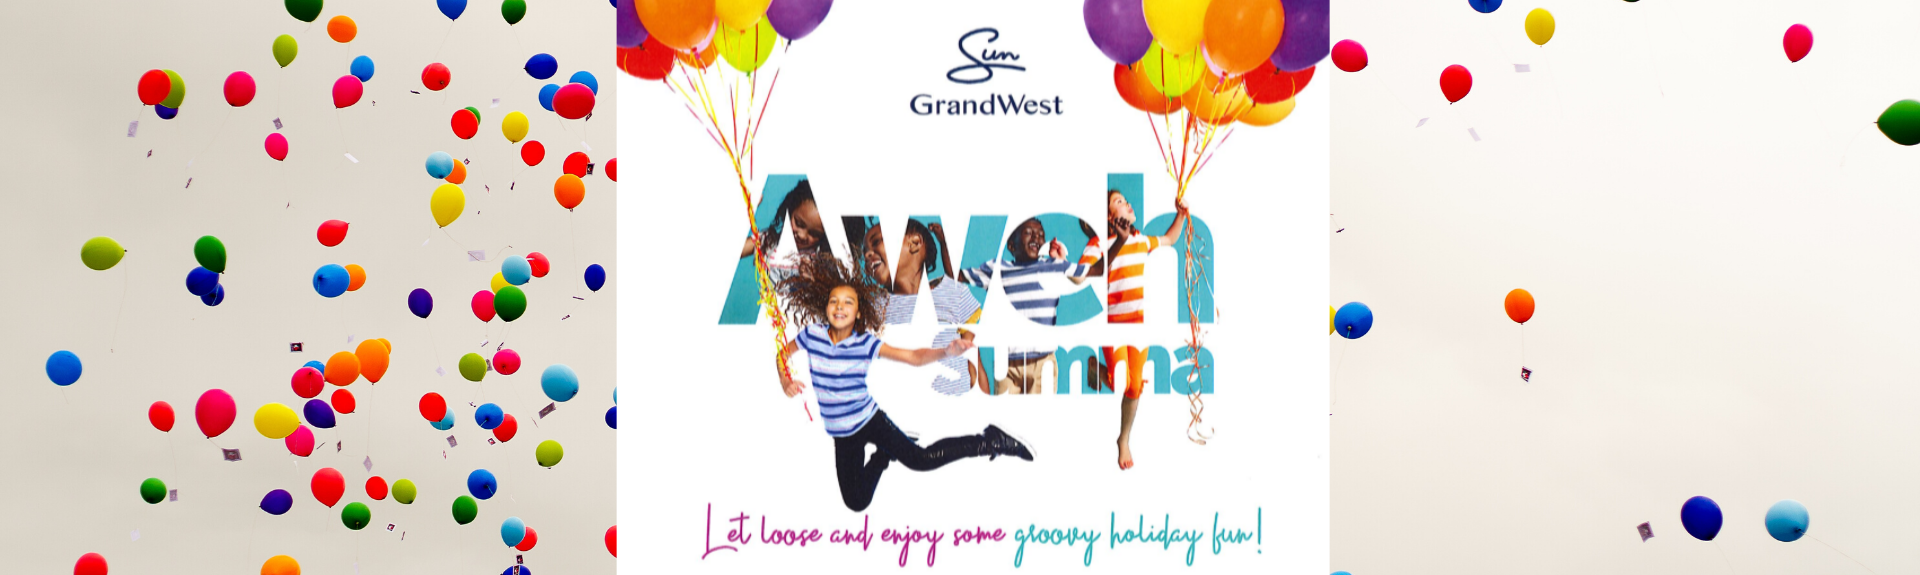 Groovy Holiday Fun at GrandWest